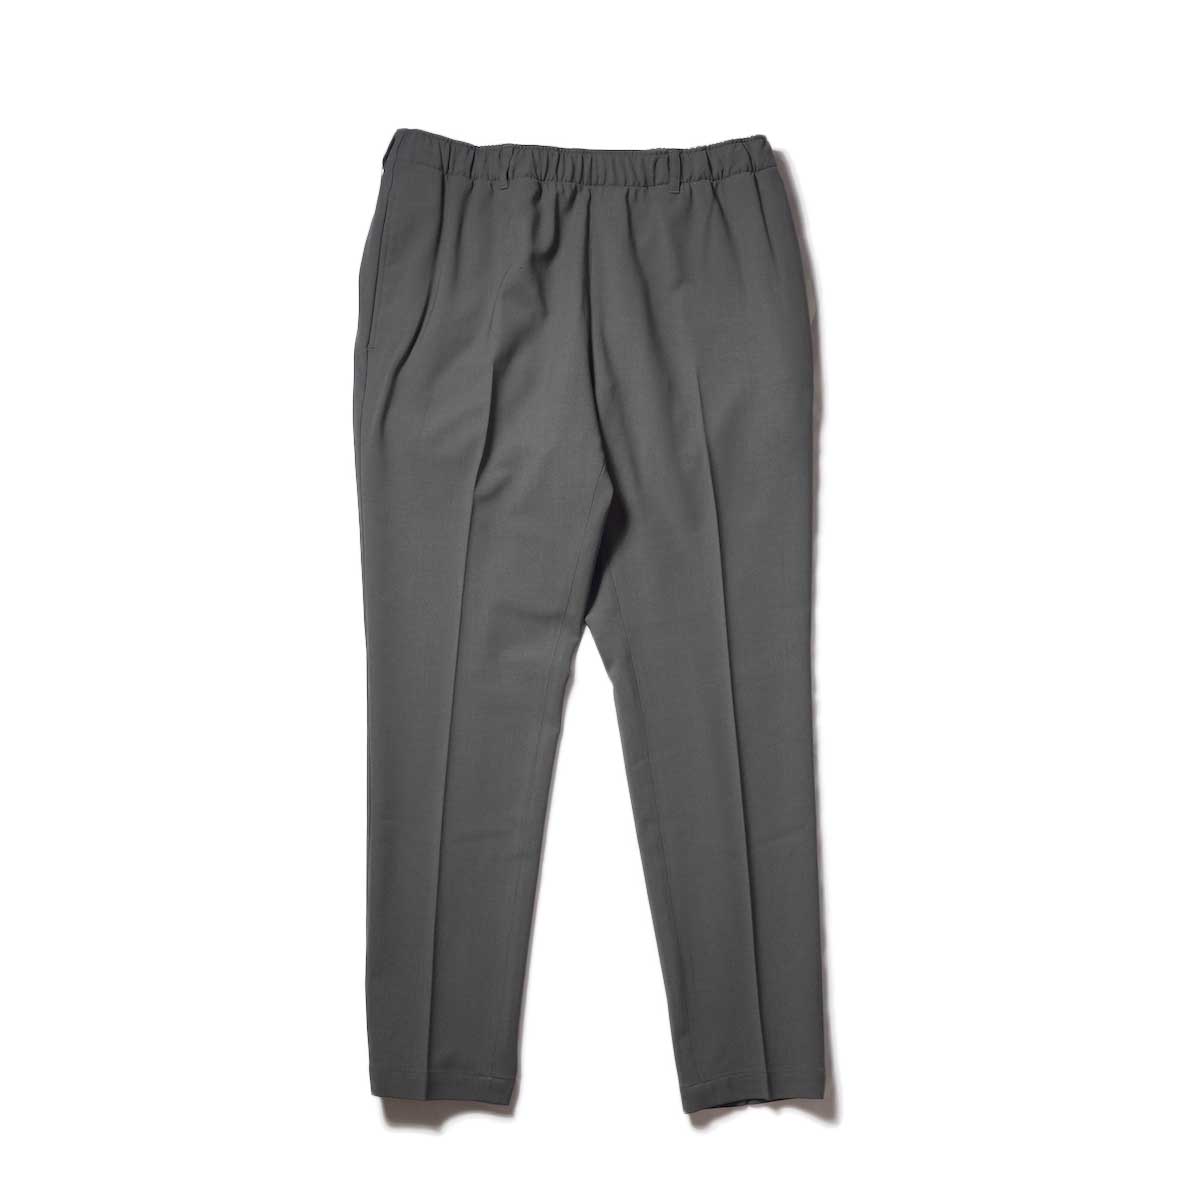 N.HOOLYWOOD / 2222-CP07-023 TAPERED EASY PANTS (Charcoal)正面